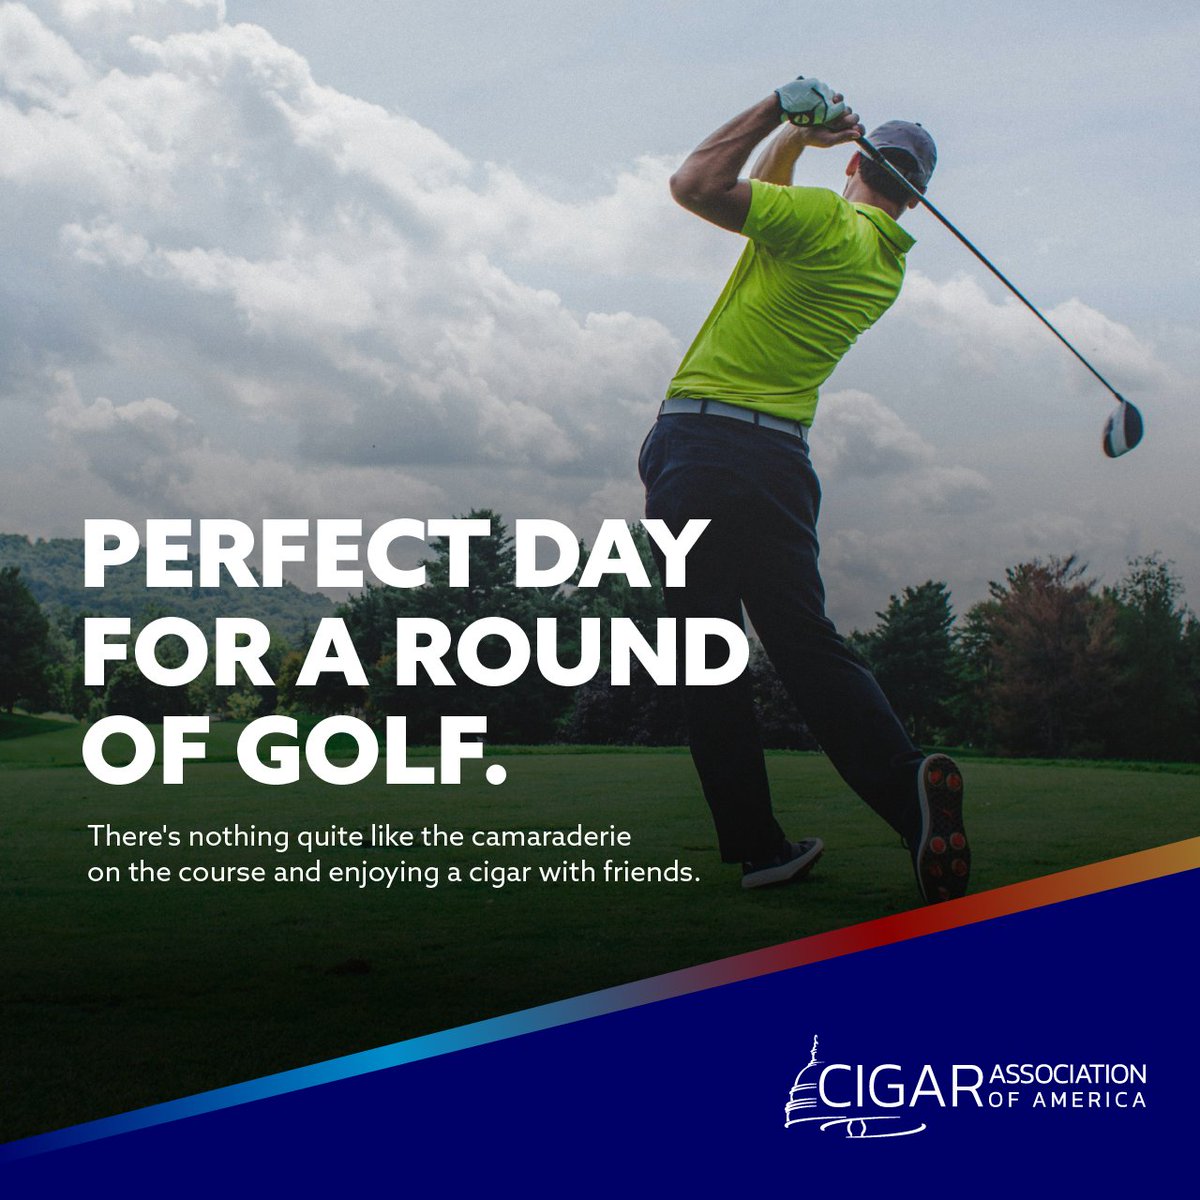 Perfect day for a round of golf and a favorite cigar with friends. When you're hitting the greens, there's nothing quite like the #camaraderie on the course.

#caa #cigarsbringpeopletogether #golfday #springtime